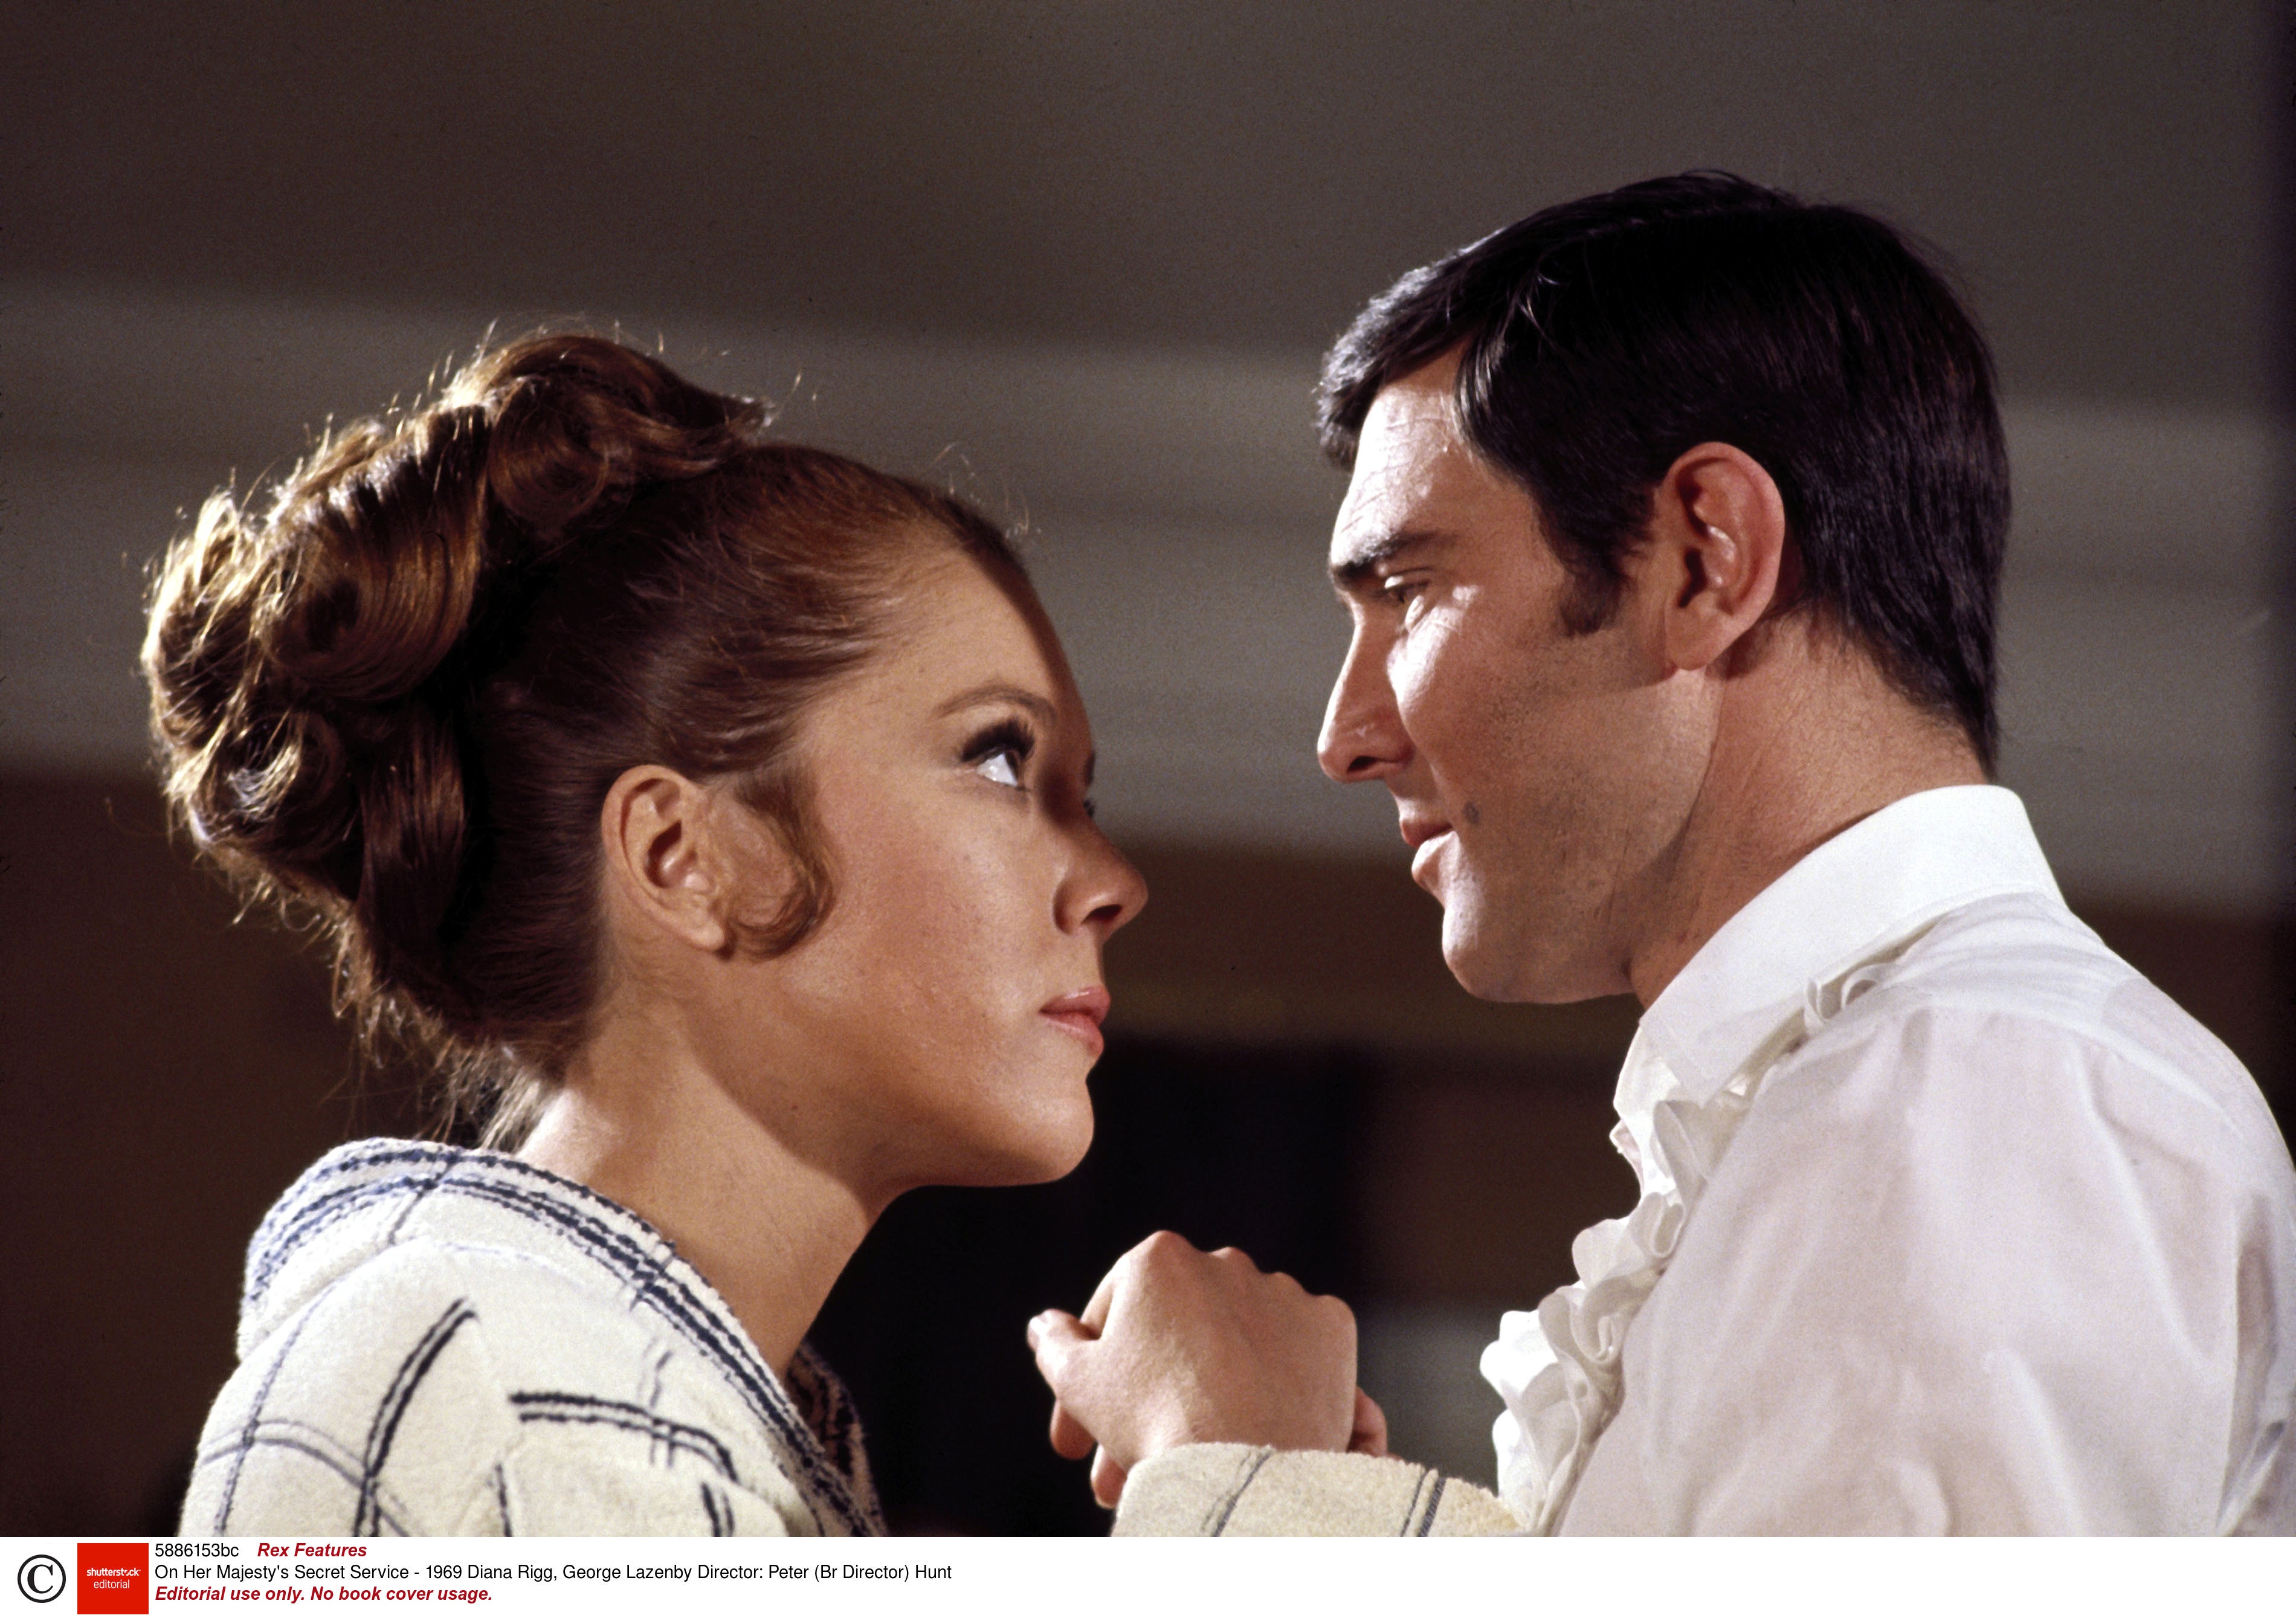 Diana Rigg and George Lazenby did not get along